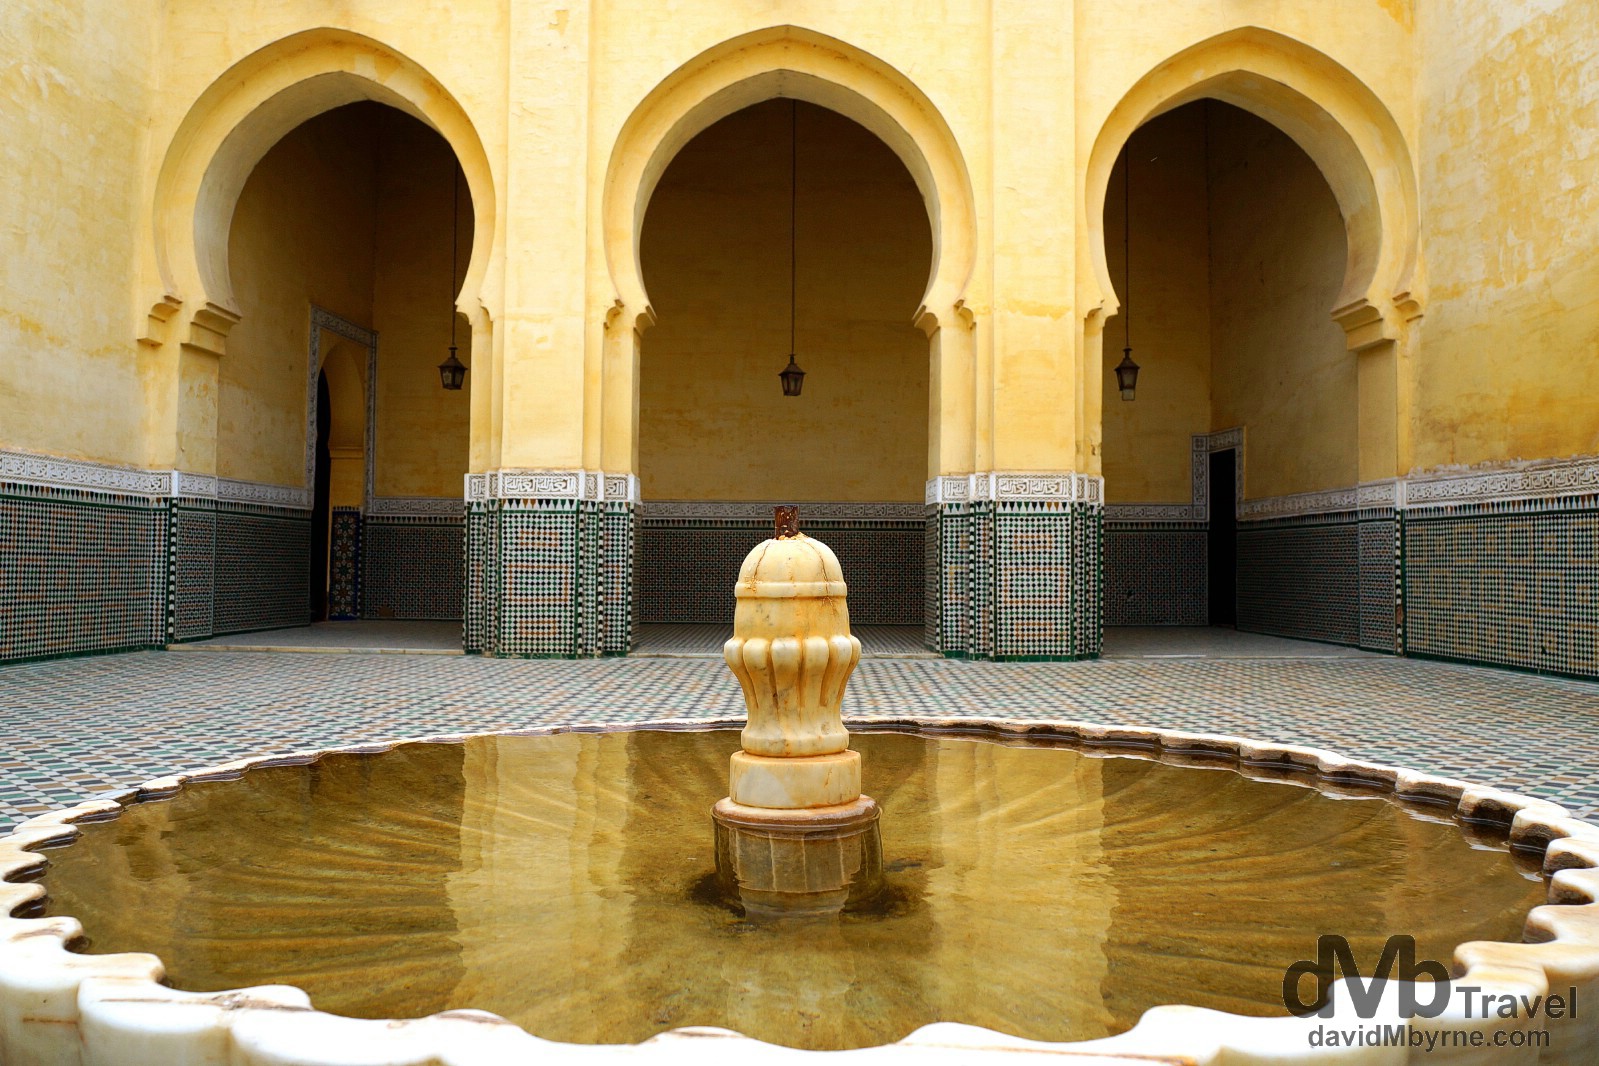 A courtyard of the Moulay Ismail Mausoleum in Meknes, Morocco. May 24th, 2014. 